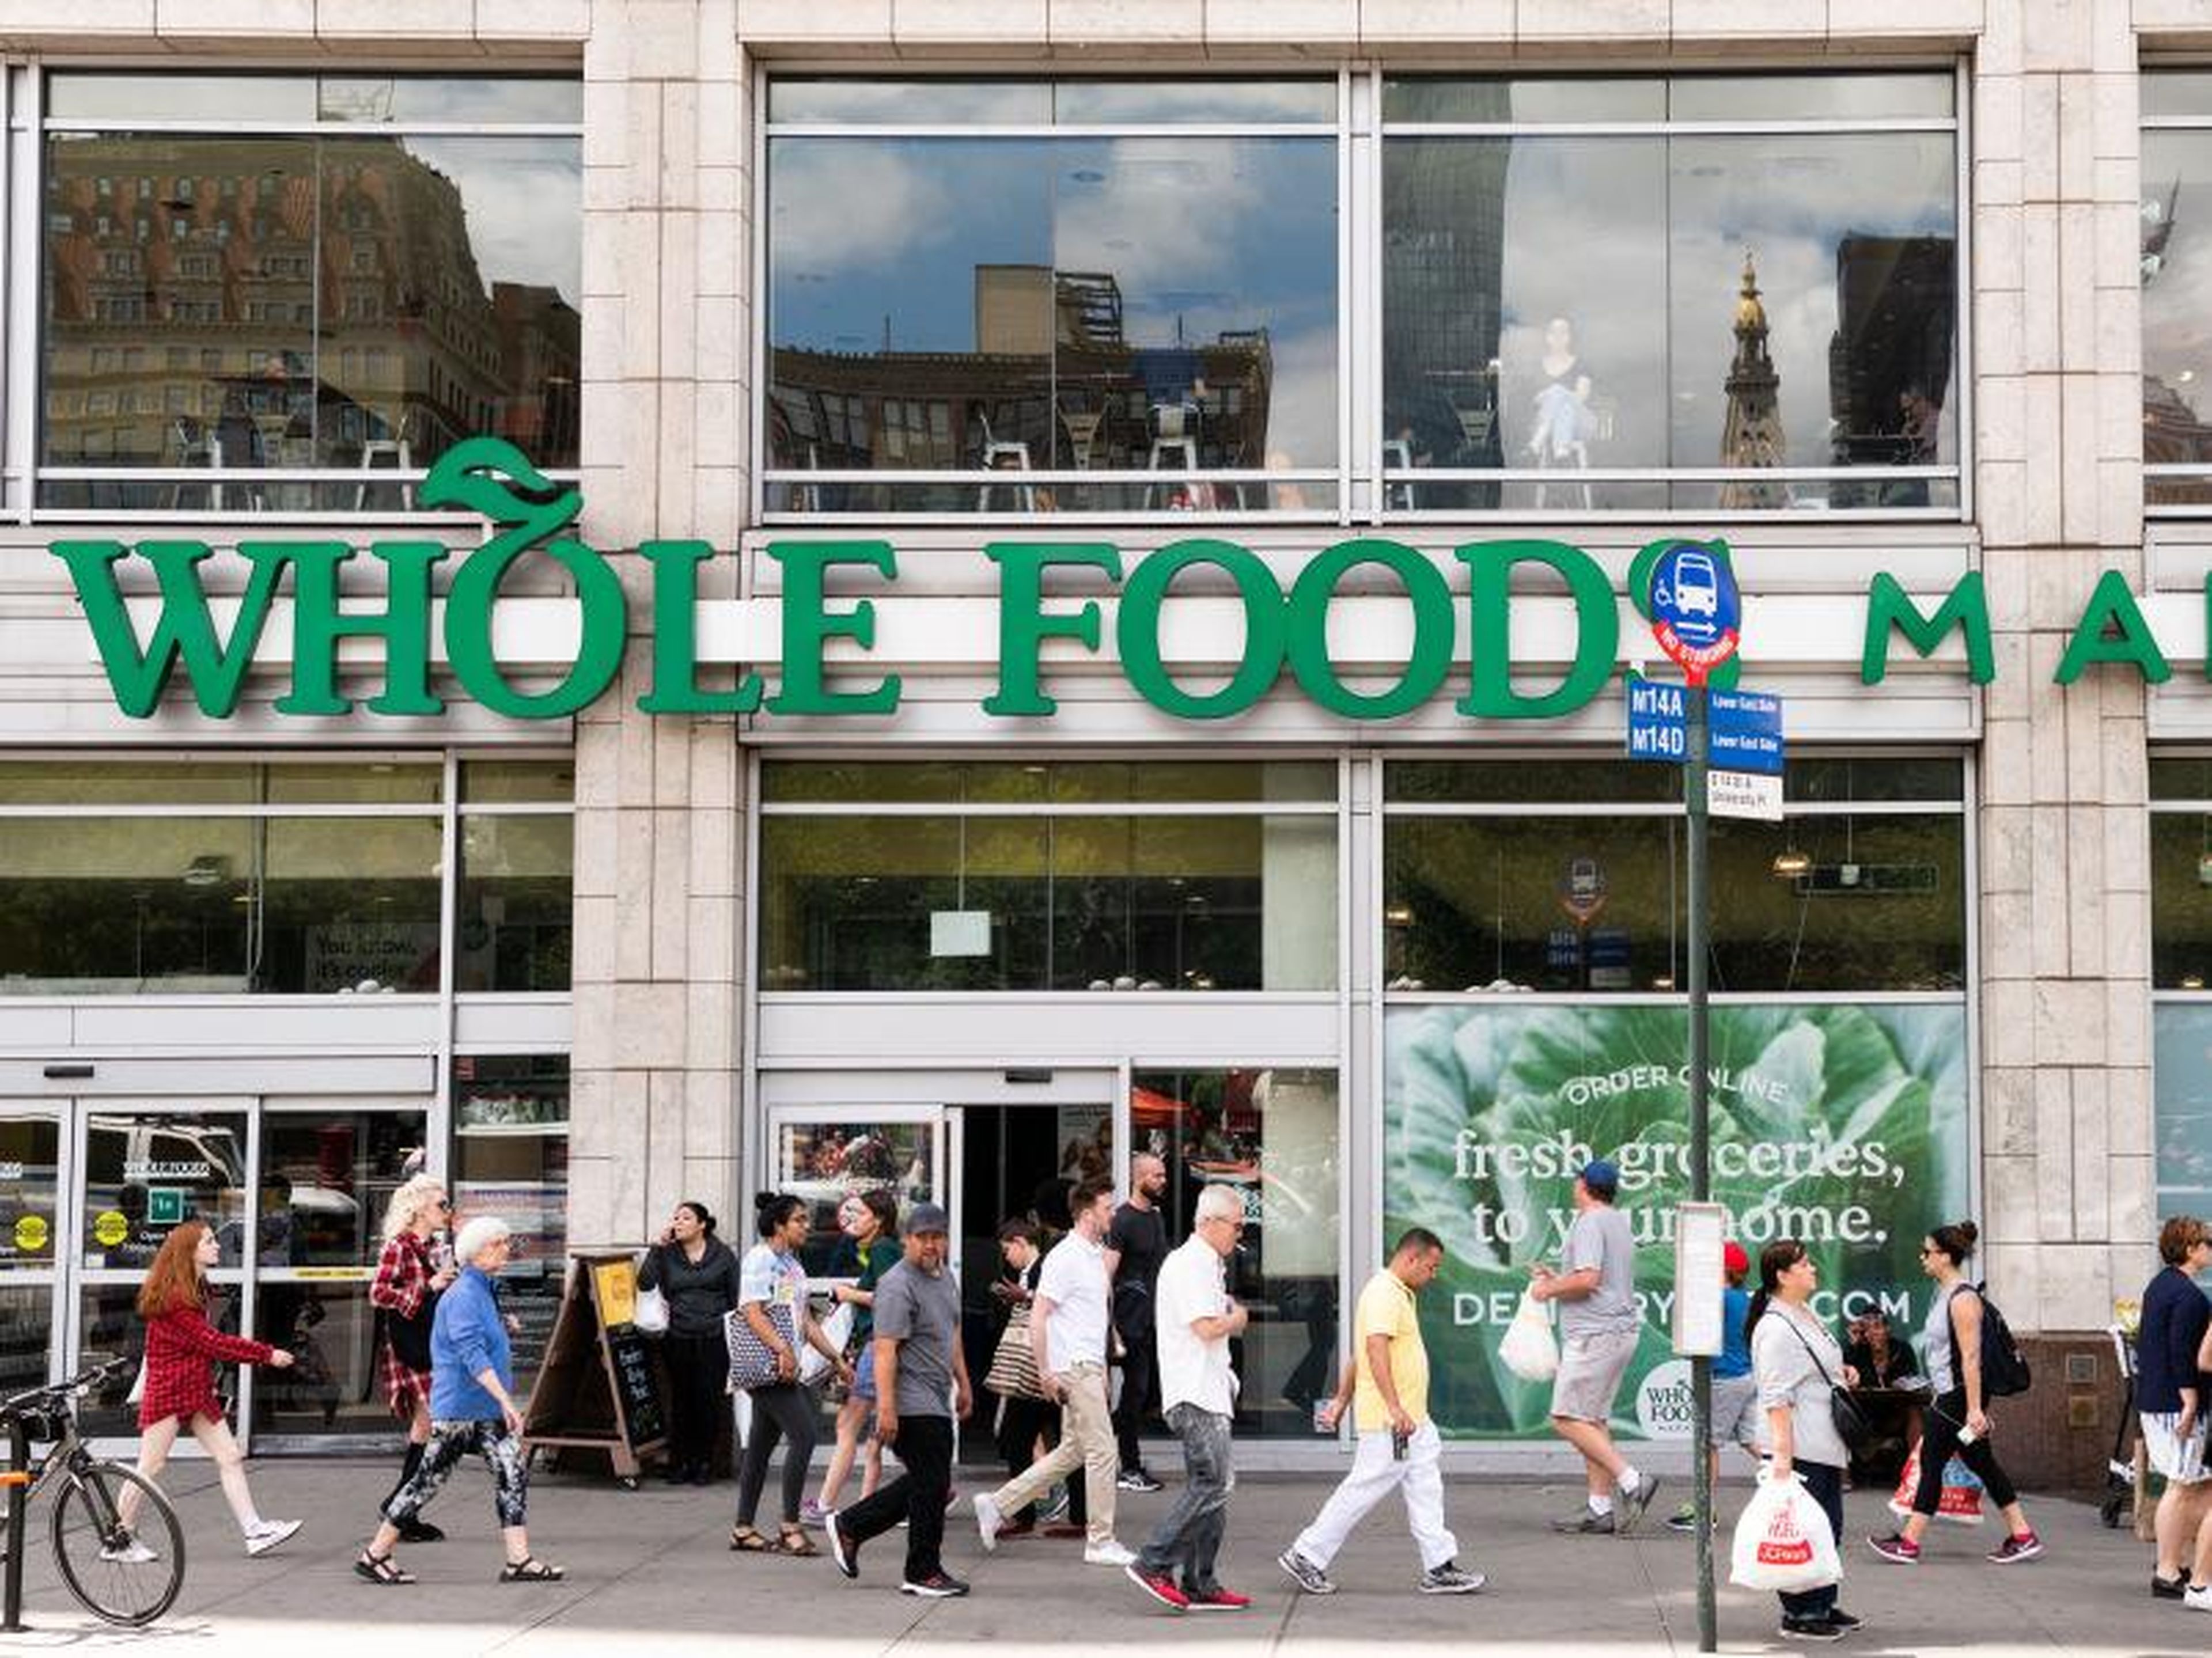 Amazon also beefed up its brick-and-mortar presence by acquiring Whole Foods in 2017 for $13.7 billion.